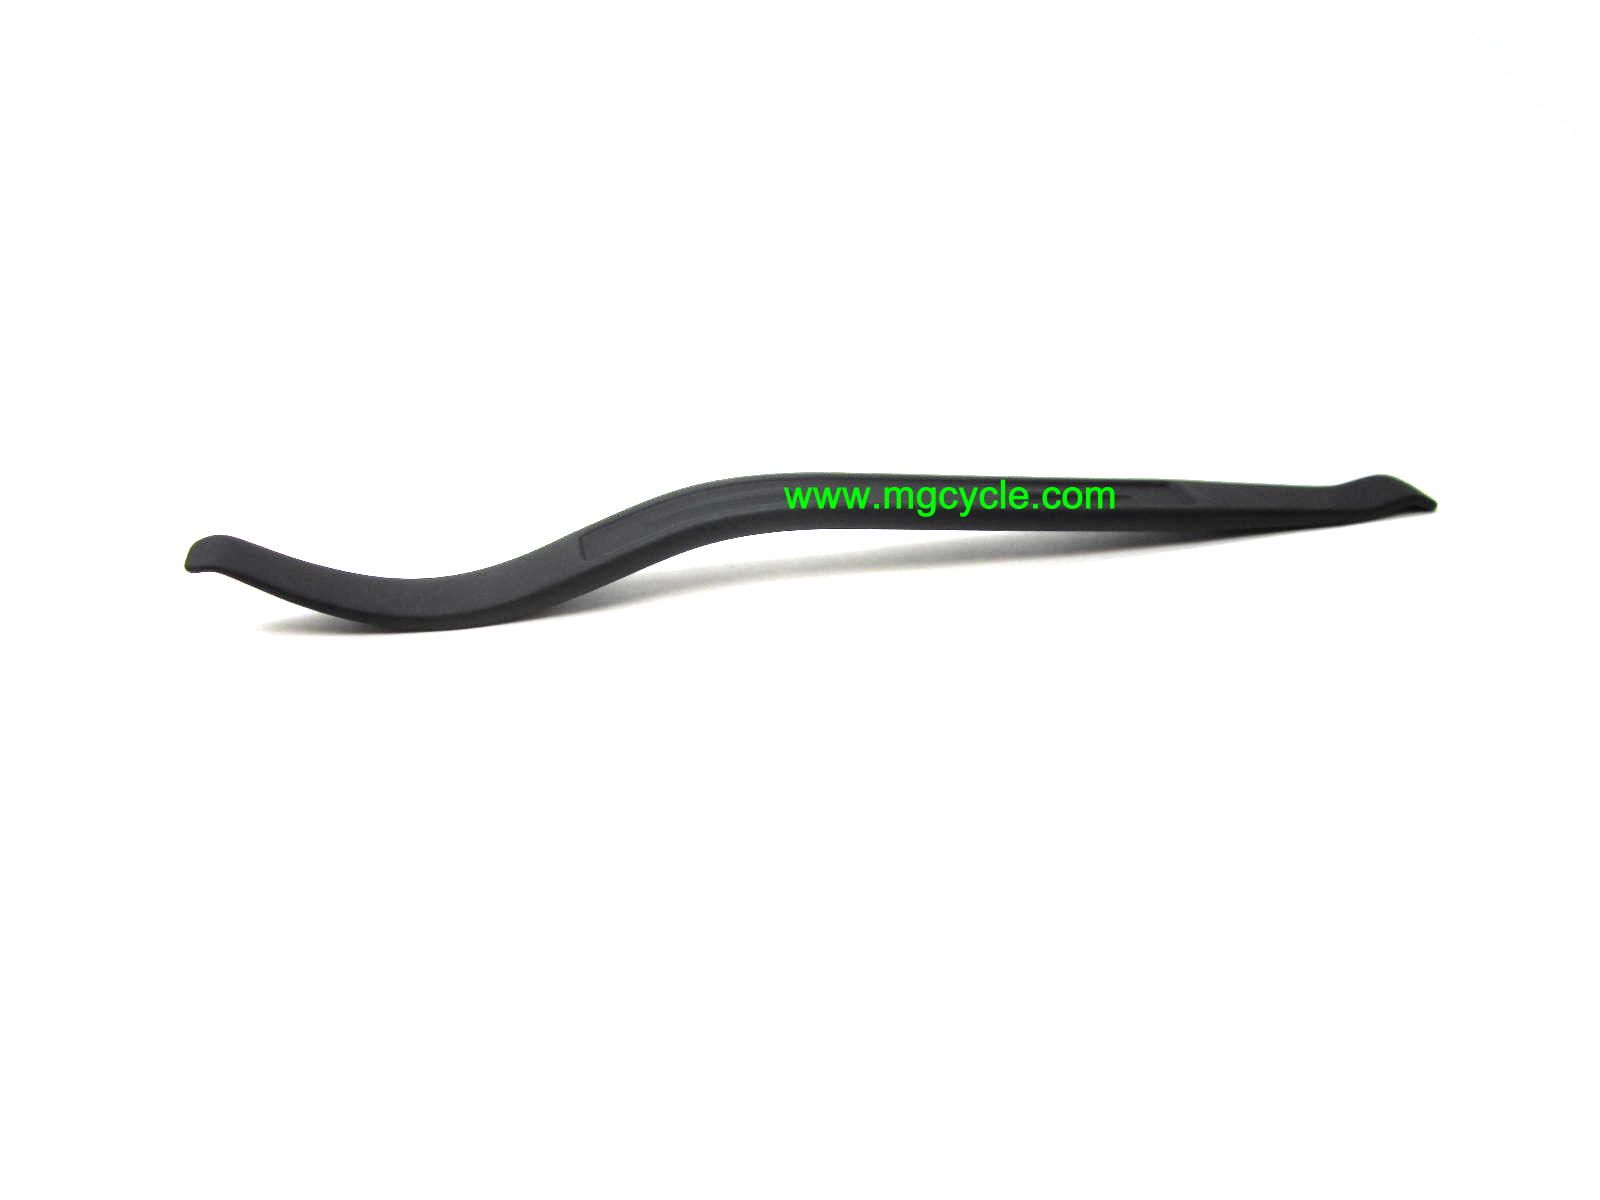 Super tire iron, curved and 15 inches long